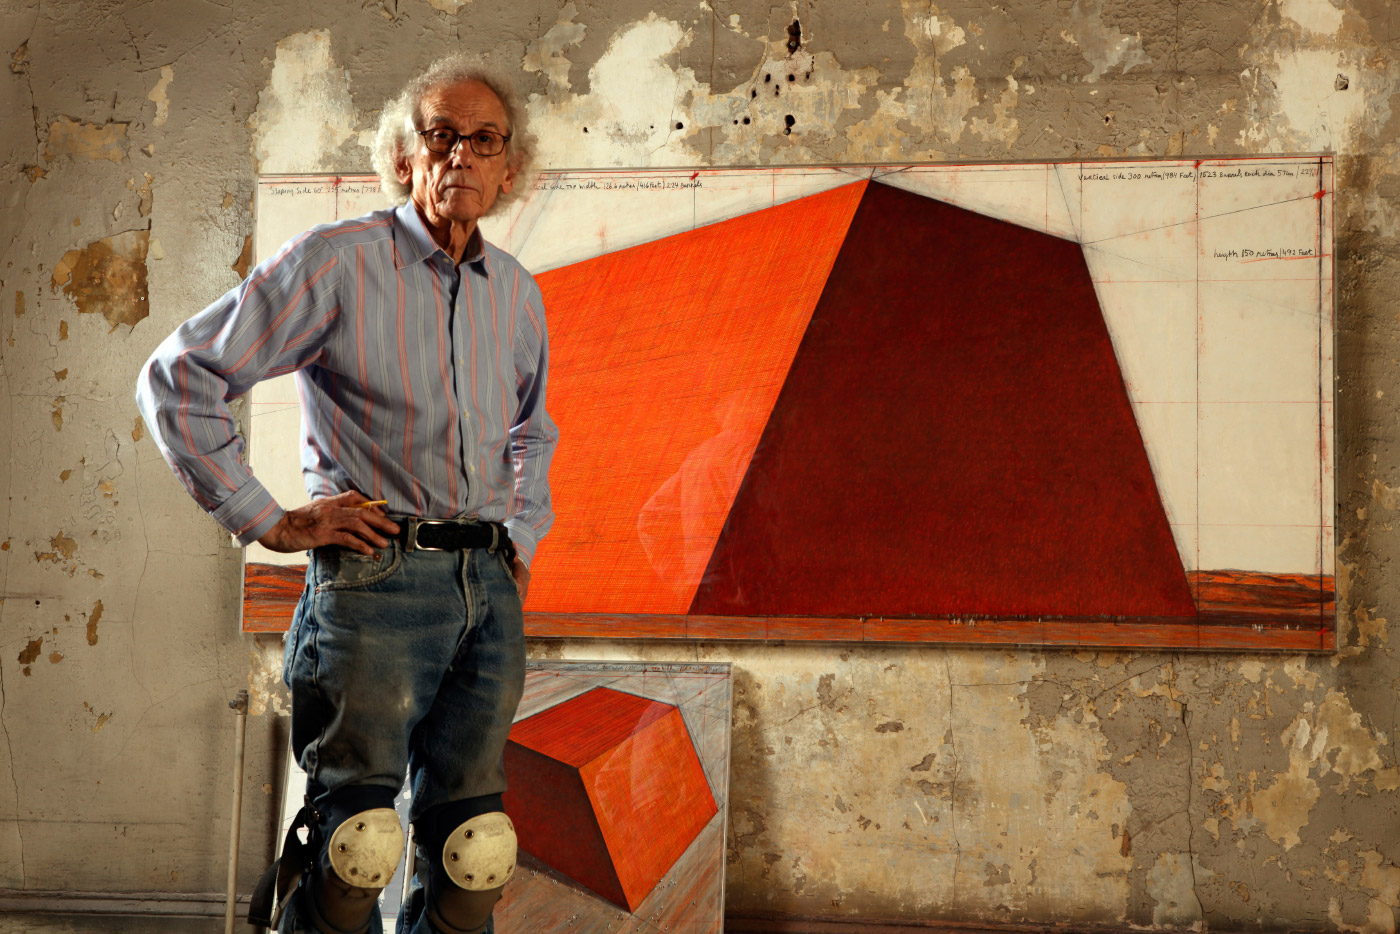 Artist Christo in front of a painting of an orange pyramid